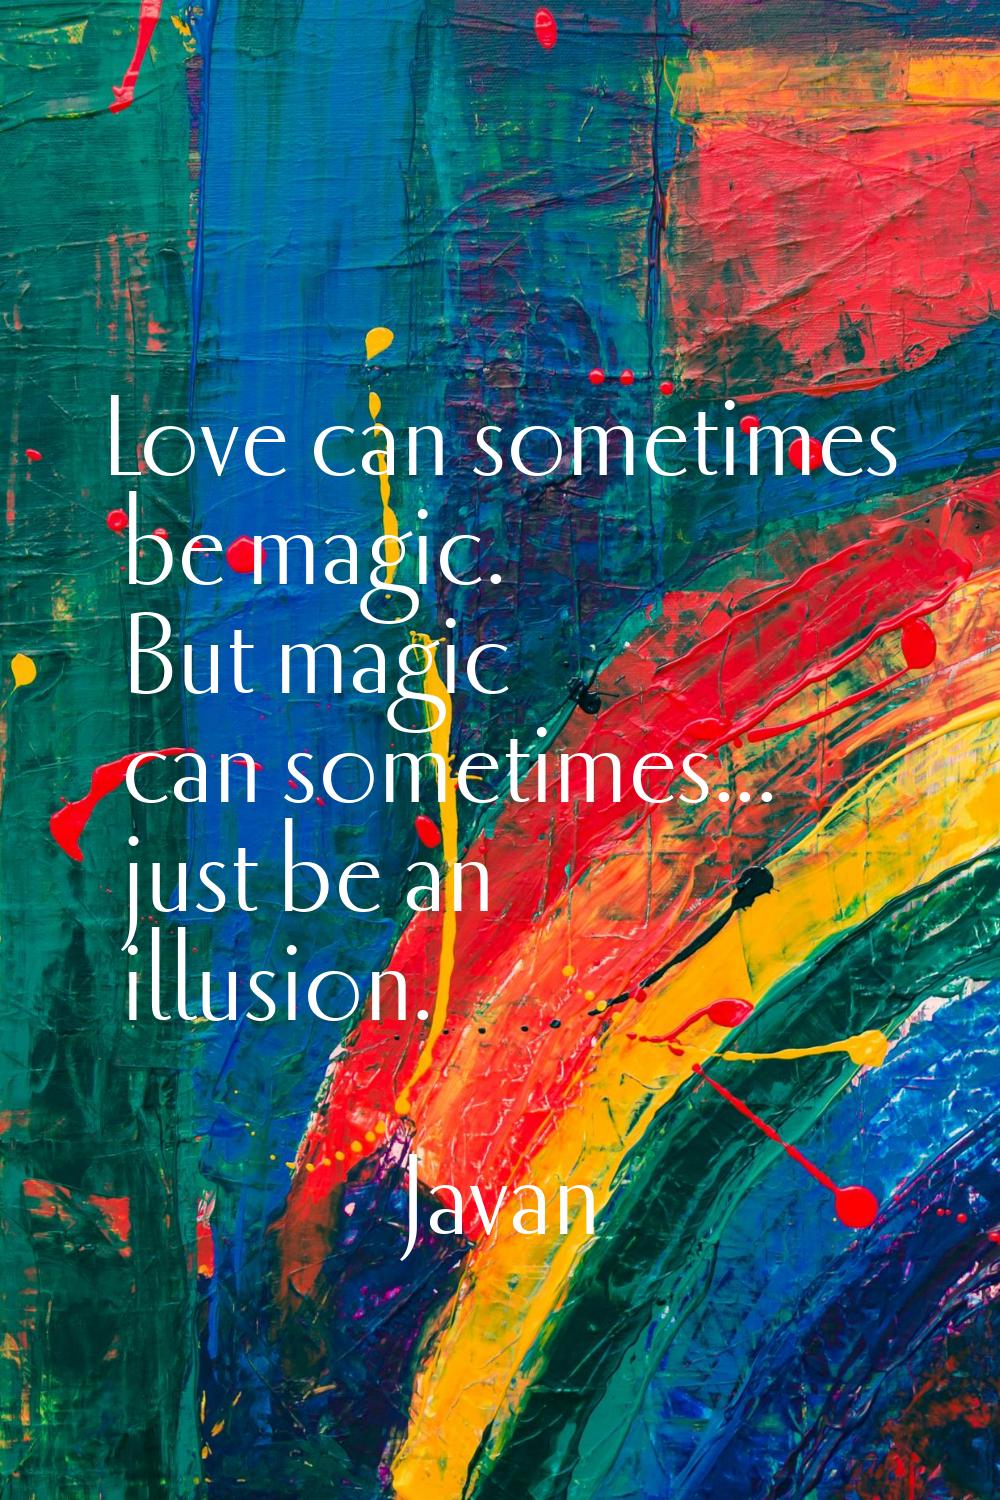 Love can sometimes be magic. But magic can sometimes... just be an illusion.